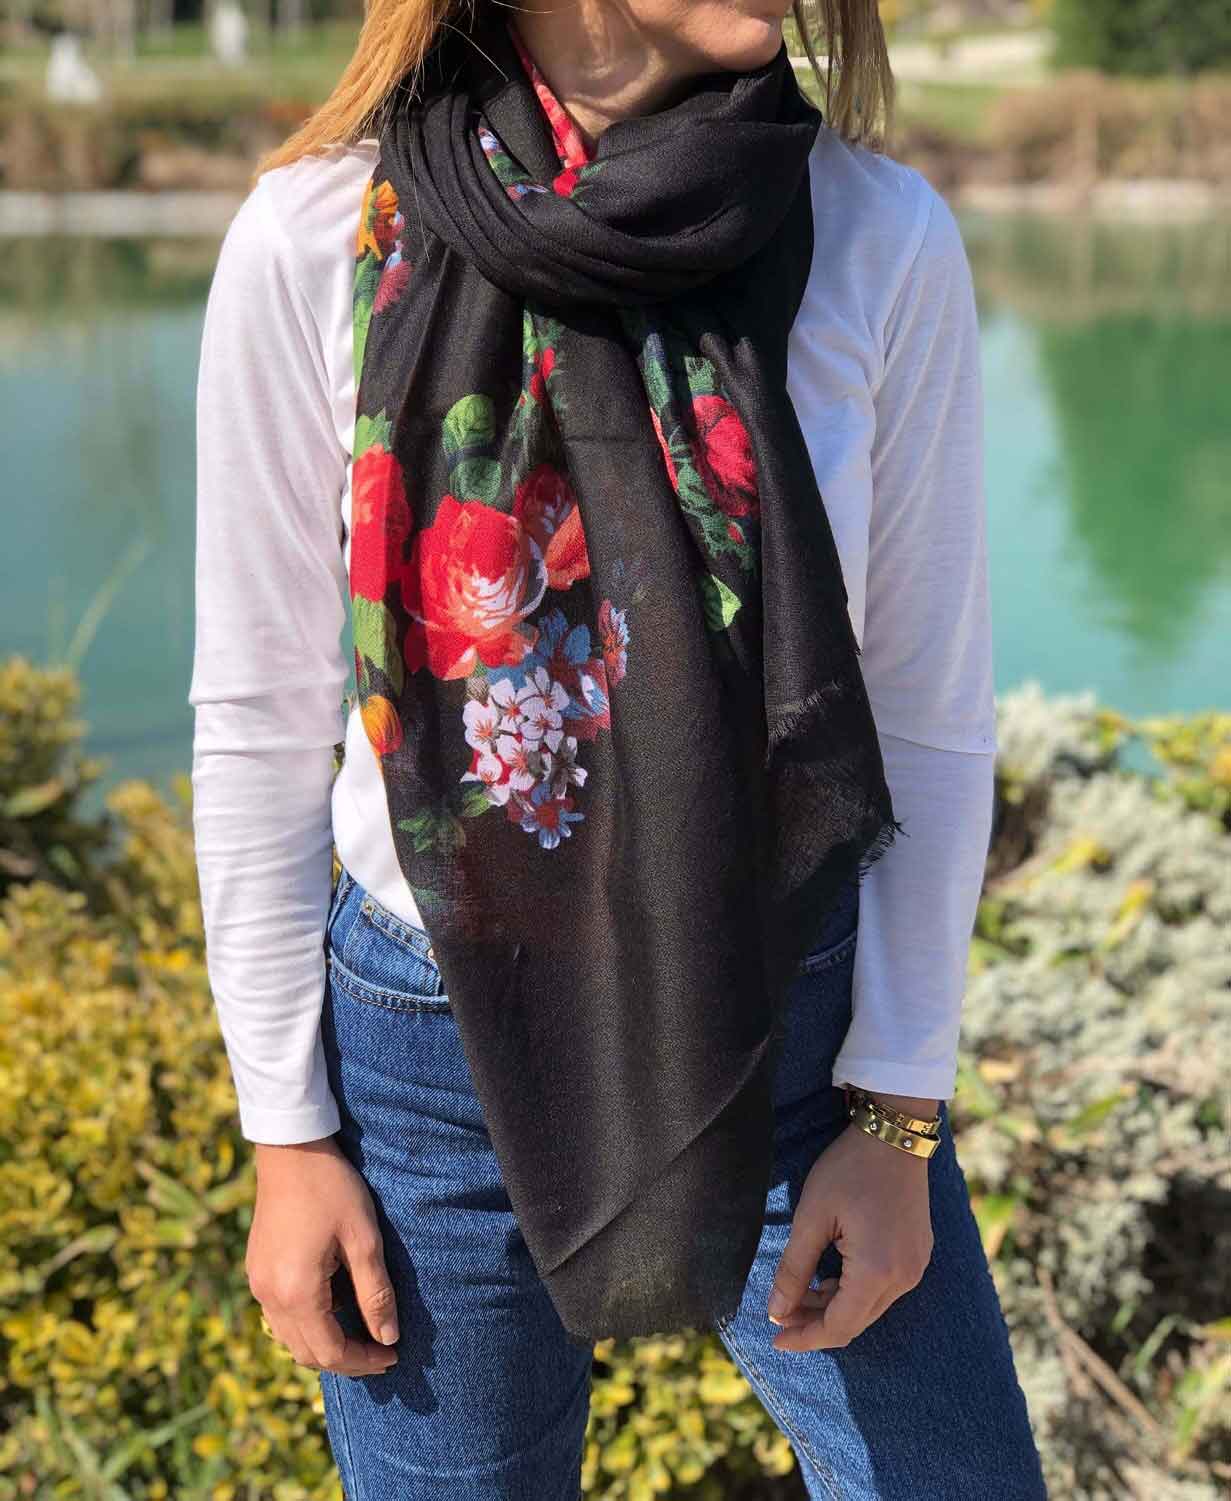 ORGANIC COTTON Scarf, Spring Autumn Rectangle Scarf, Best Gift for Her, Black and Floral with Softly Frayed Edges